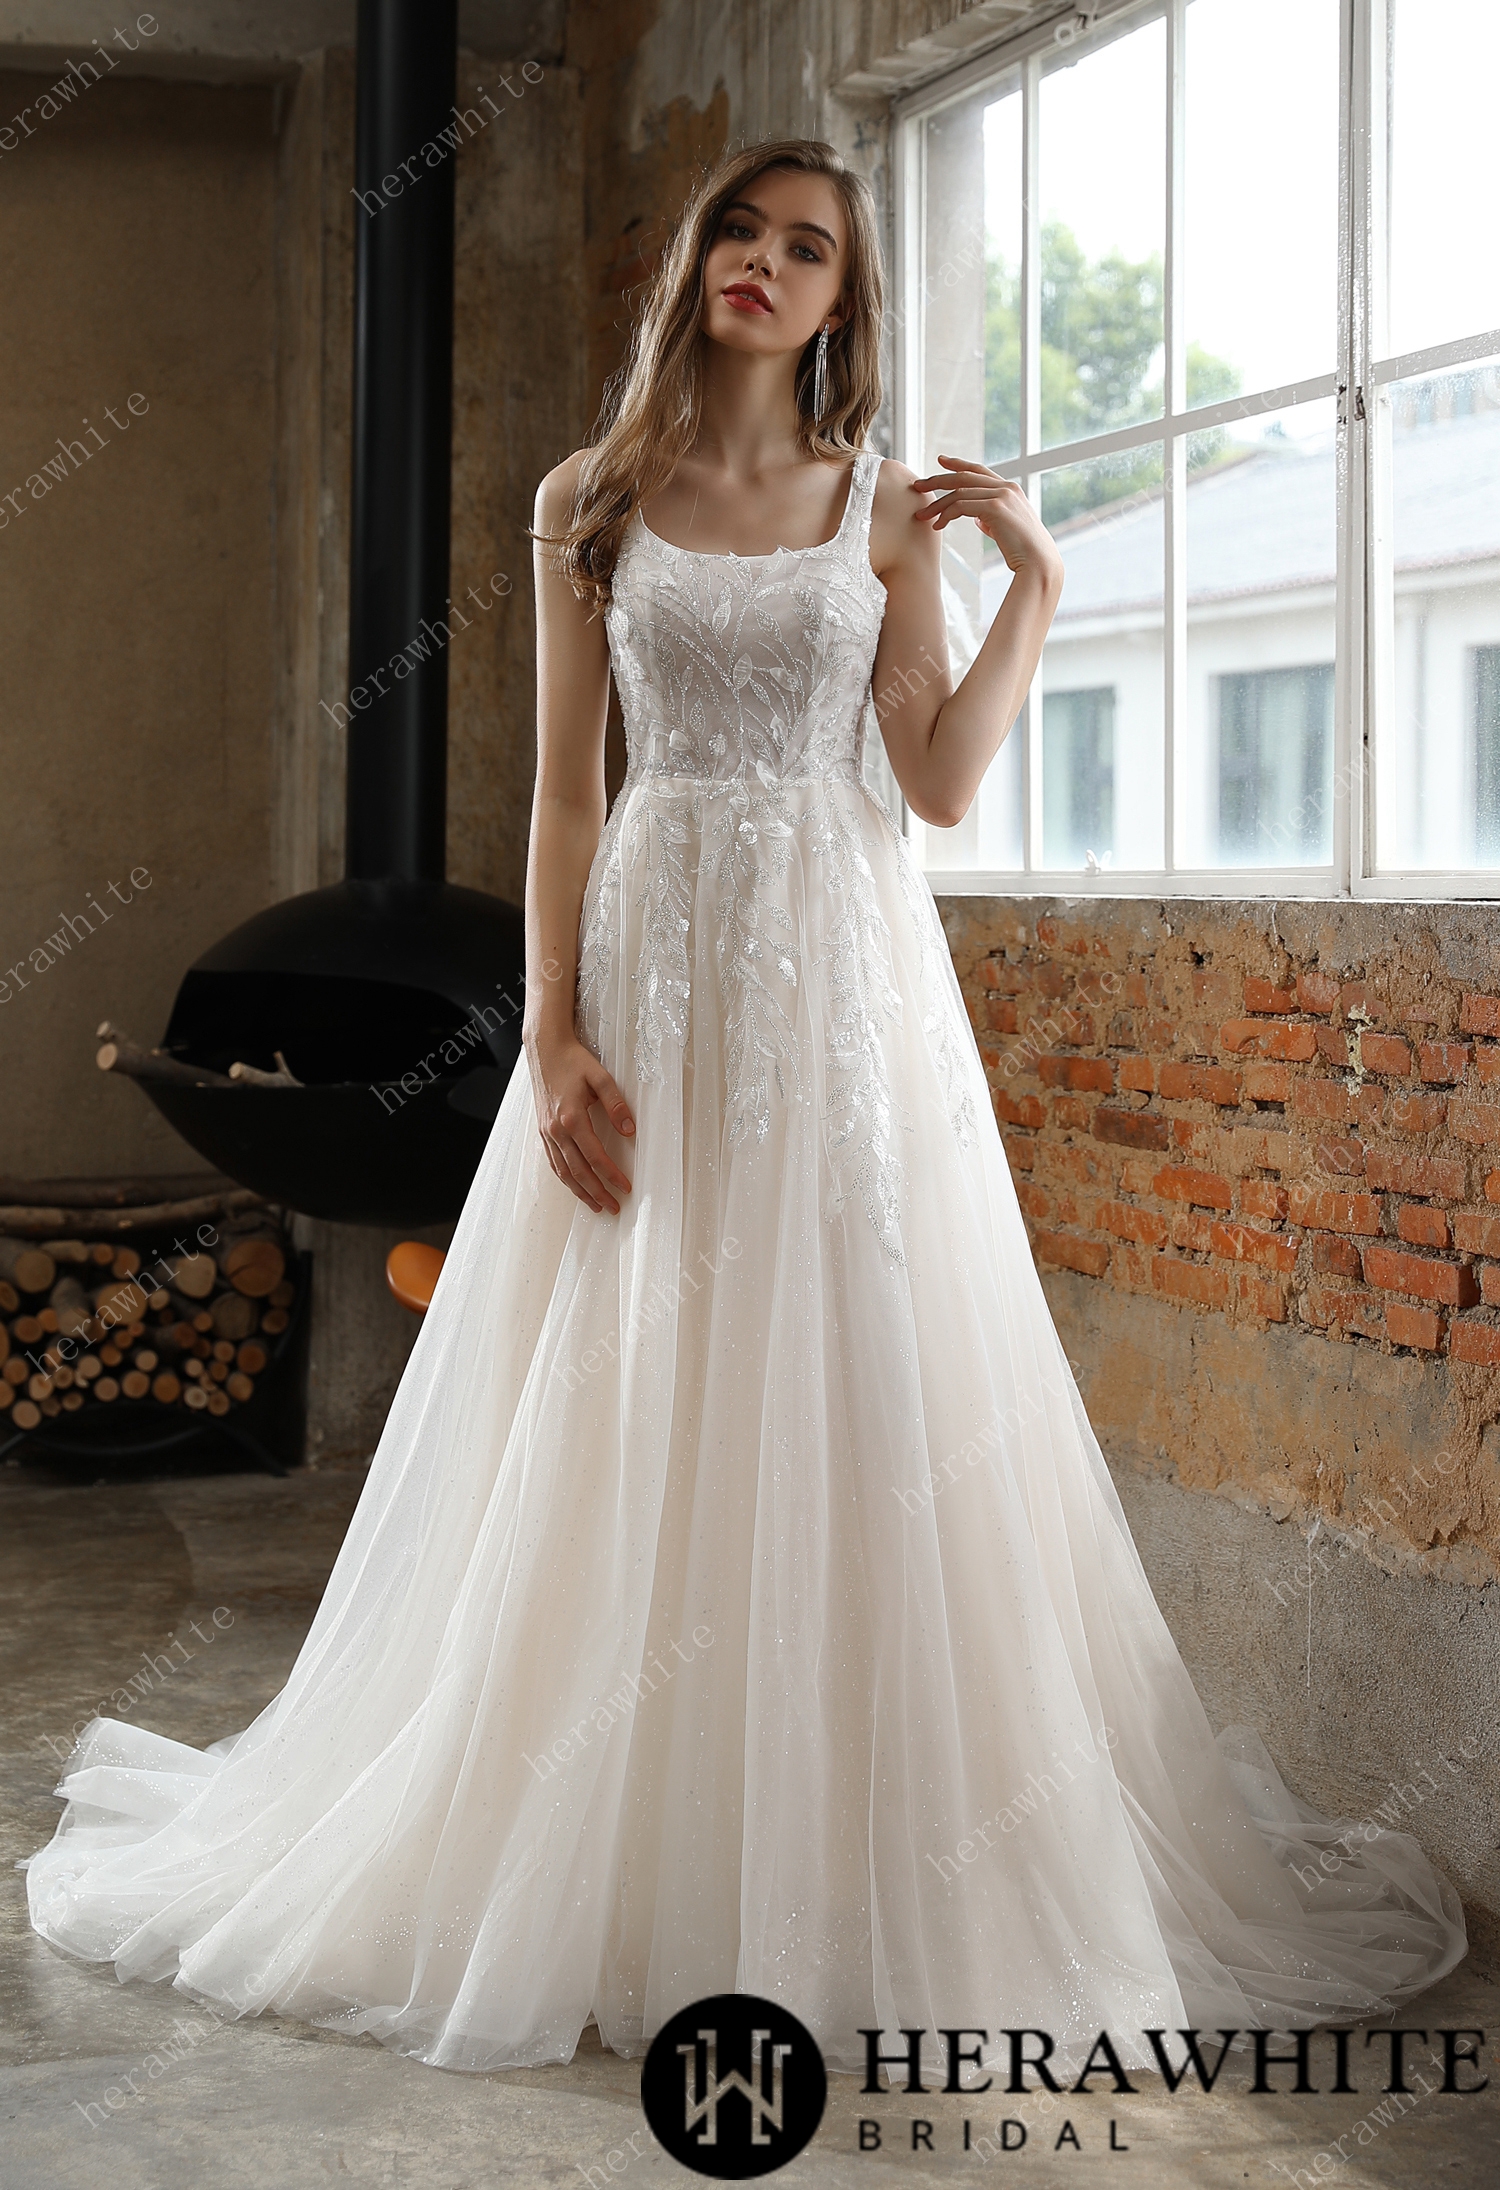 Square Neckline Wedding Dress with Delicate Leafy Lace